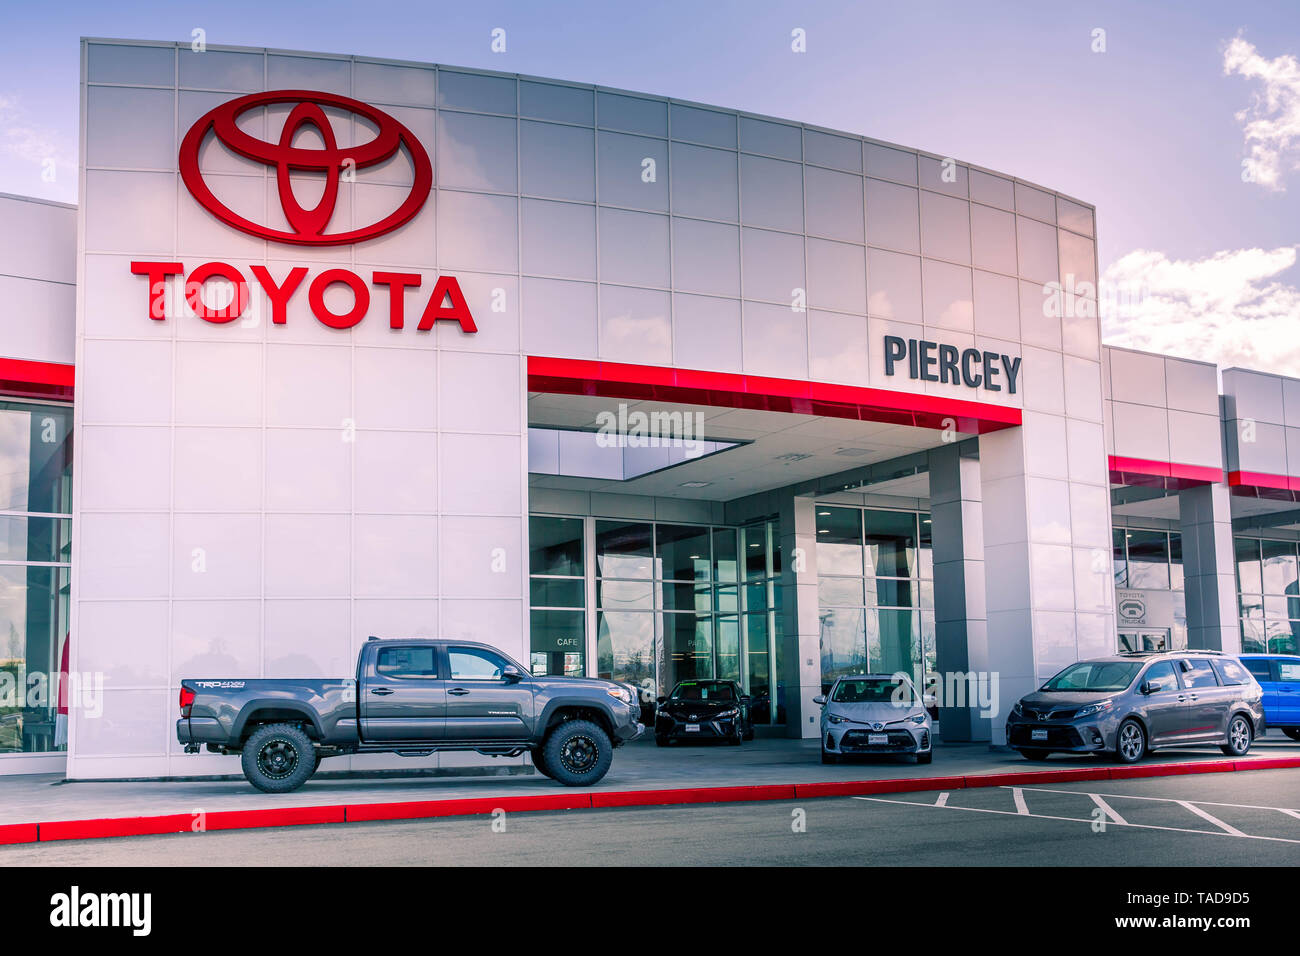 Toyota Motor Corporation Quarterly Earnings Preview